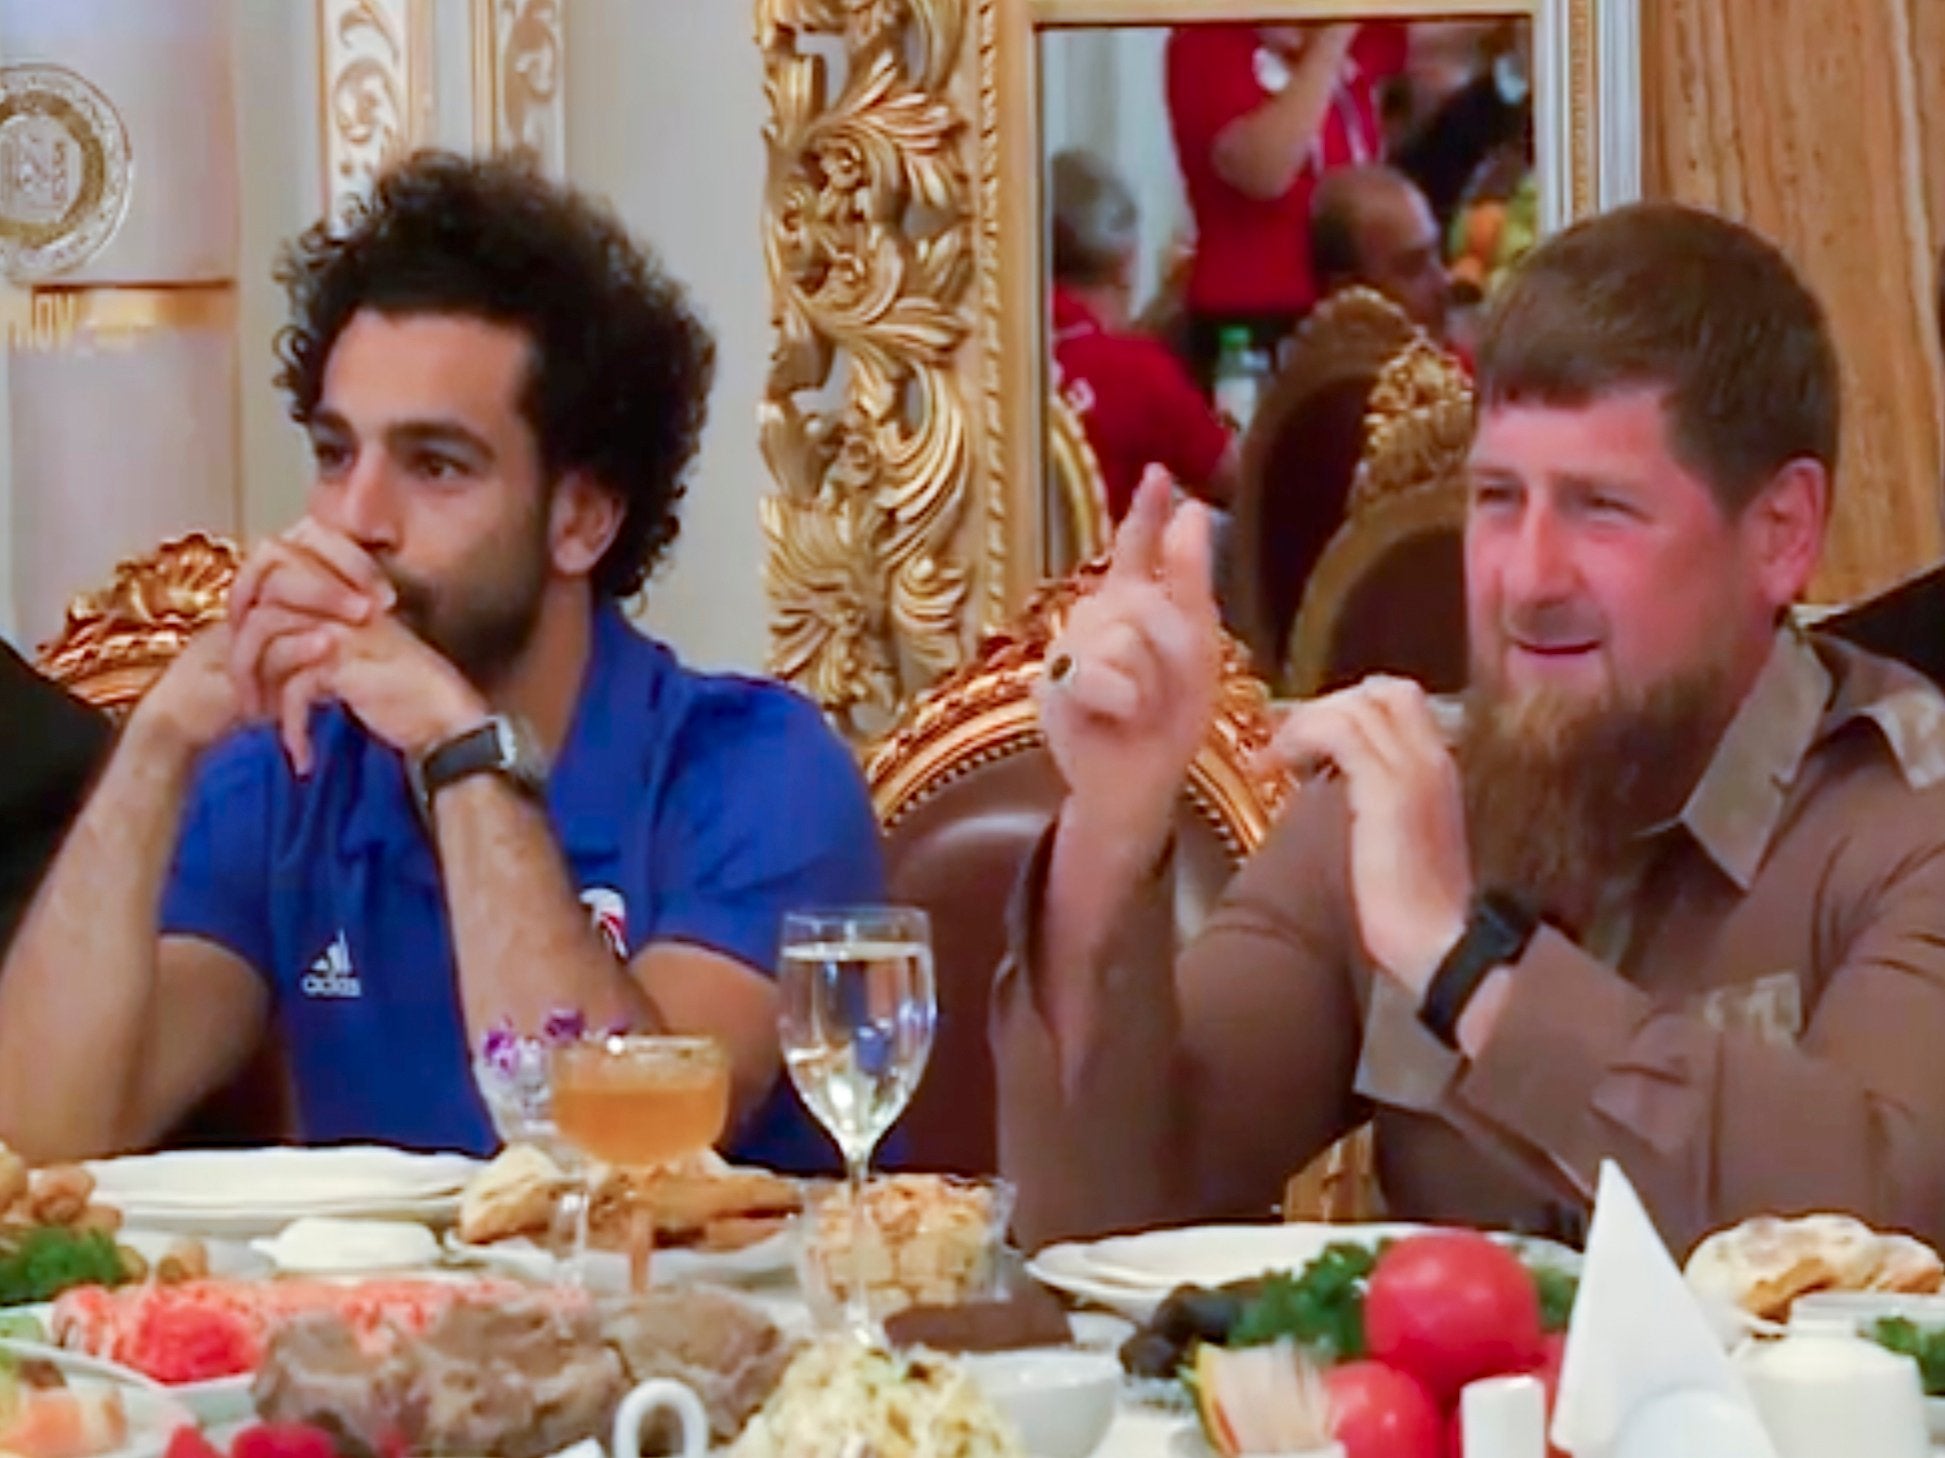 Mohamed Salah has attracted criticism for meeting Chechen leader Ramzan Kadyrov and receiving honorary citizenship